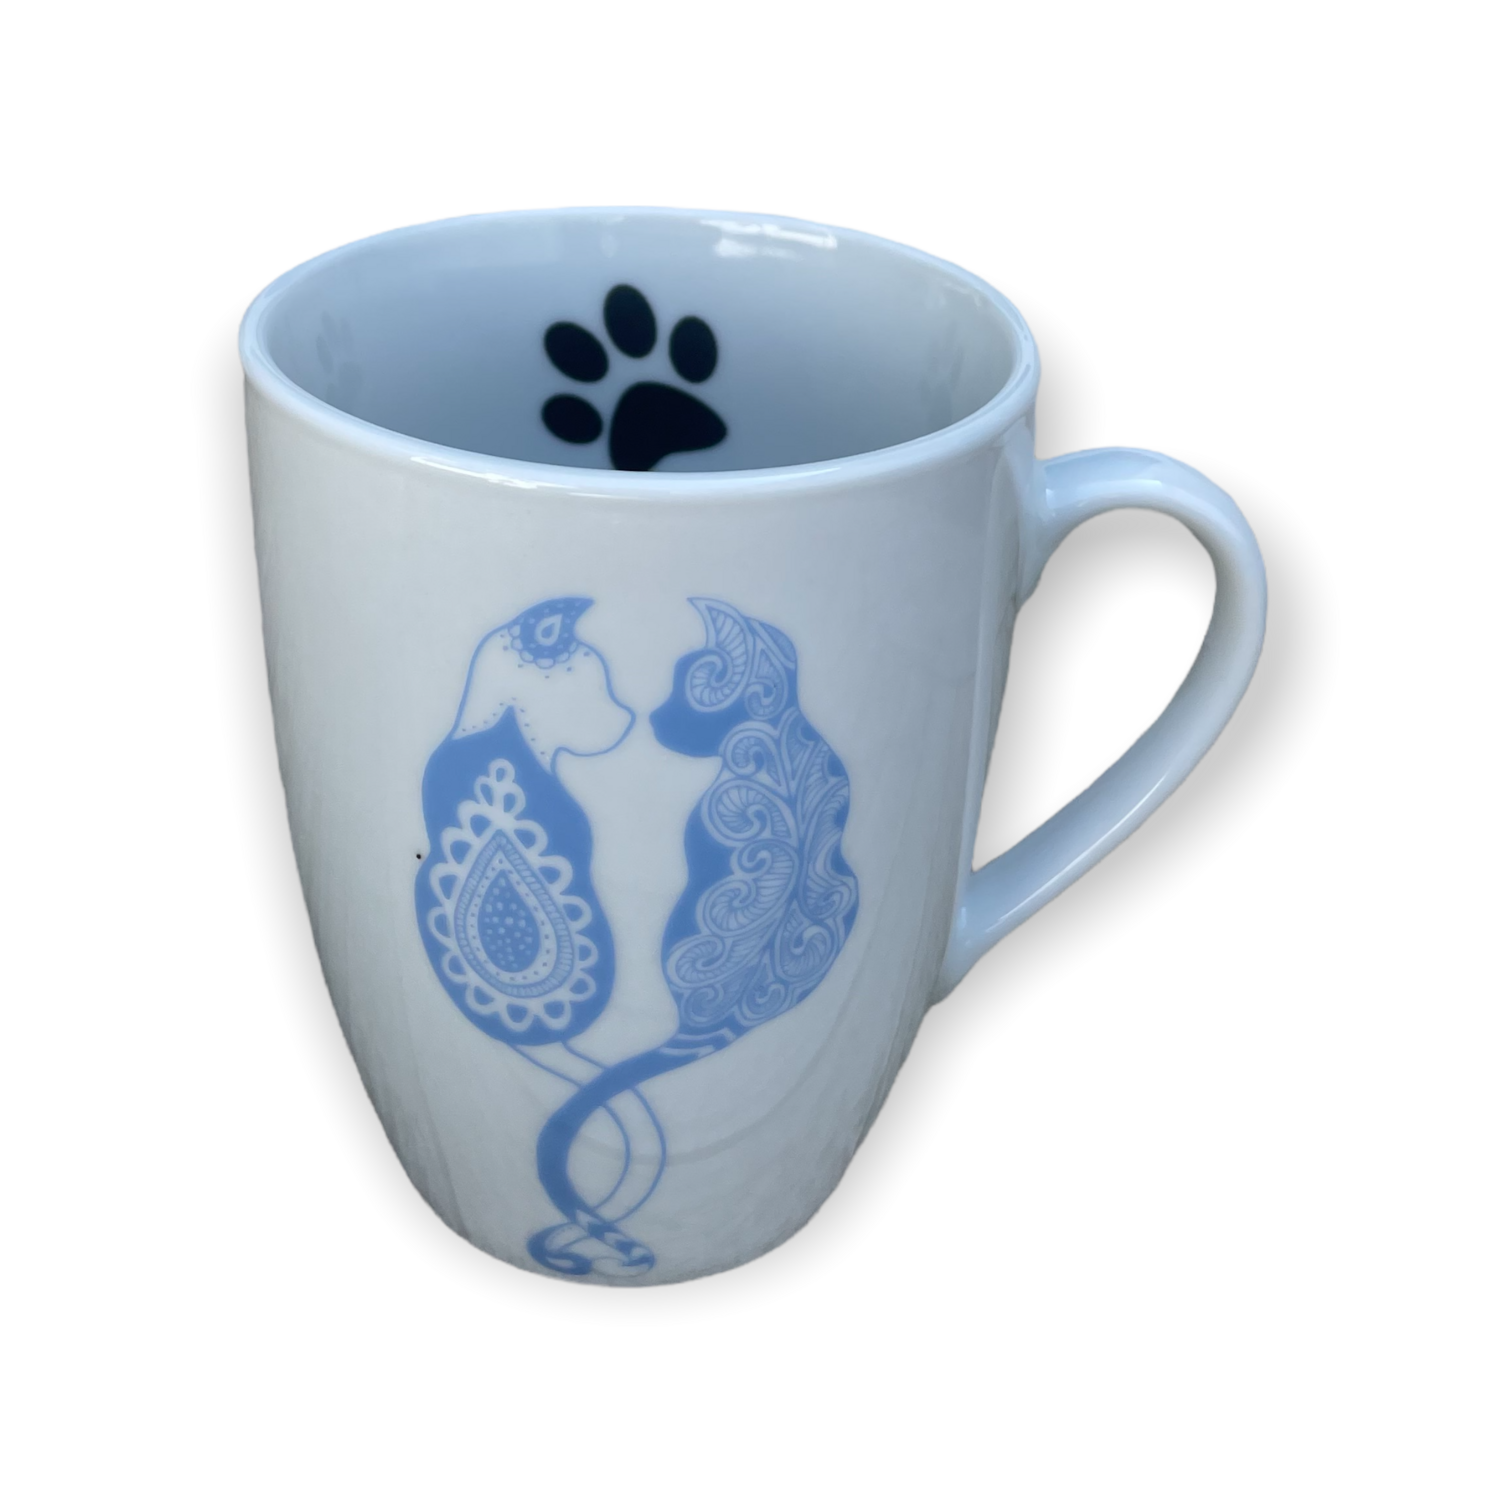 Mok oor, maat L / Mug ear size L, The Fabulous Cat Collection